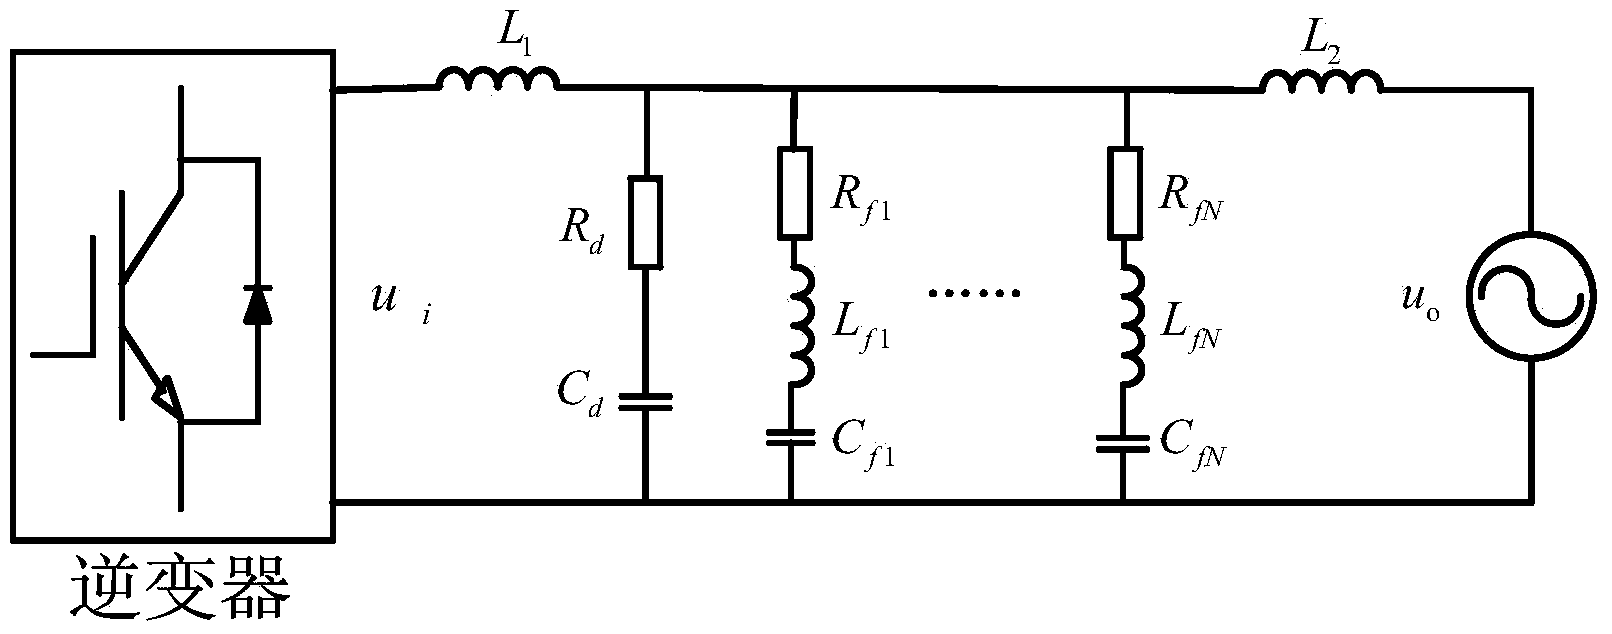 Inverter output filter with a set of series resonance subcircuits